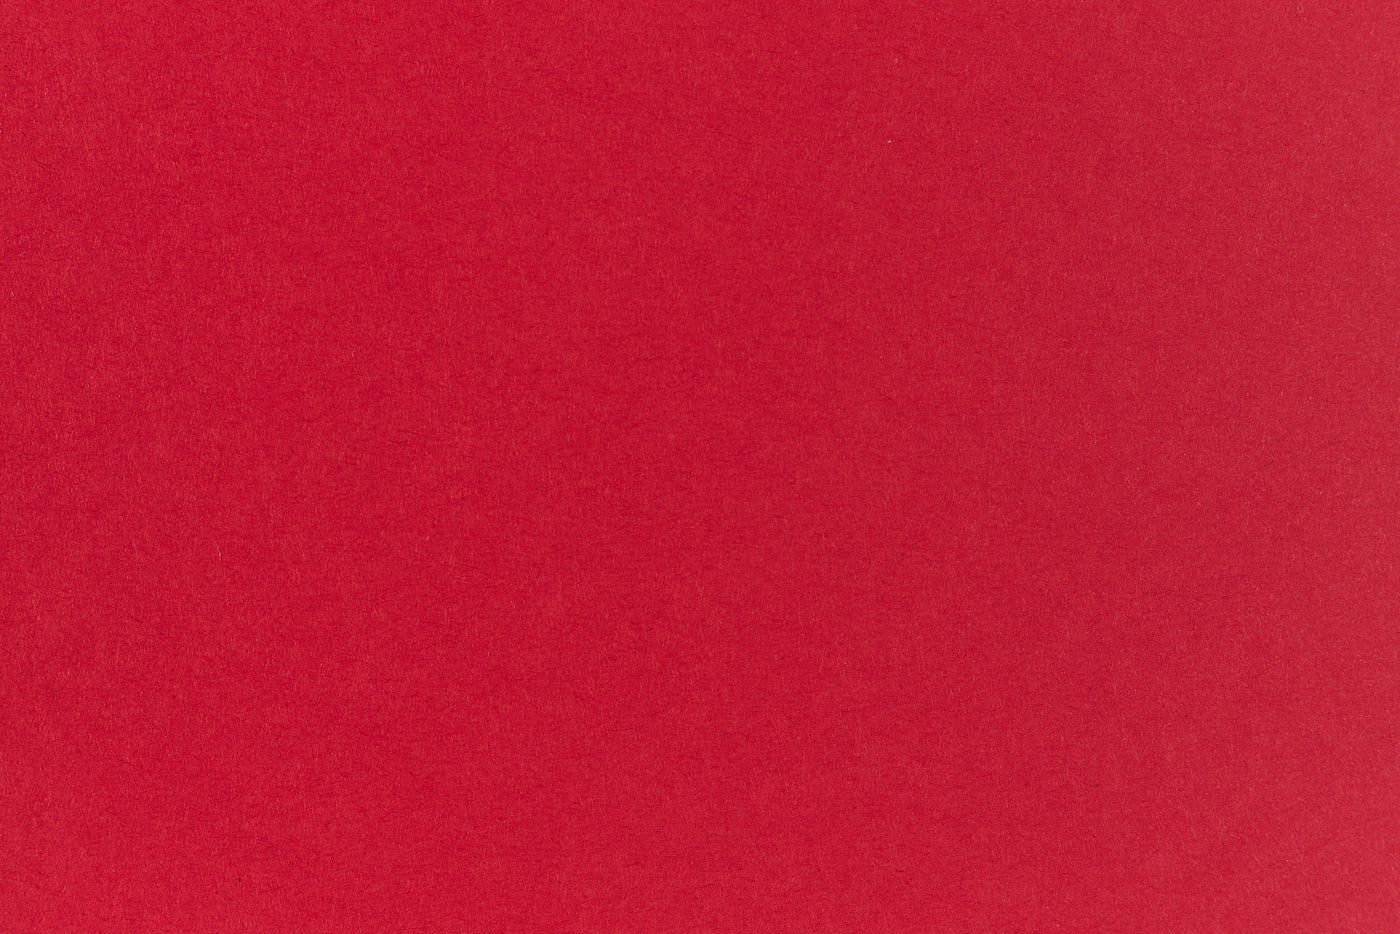 Bright red crafting paper viewed close up. 